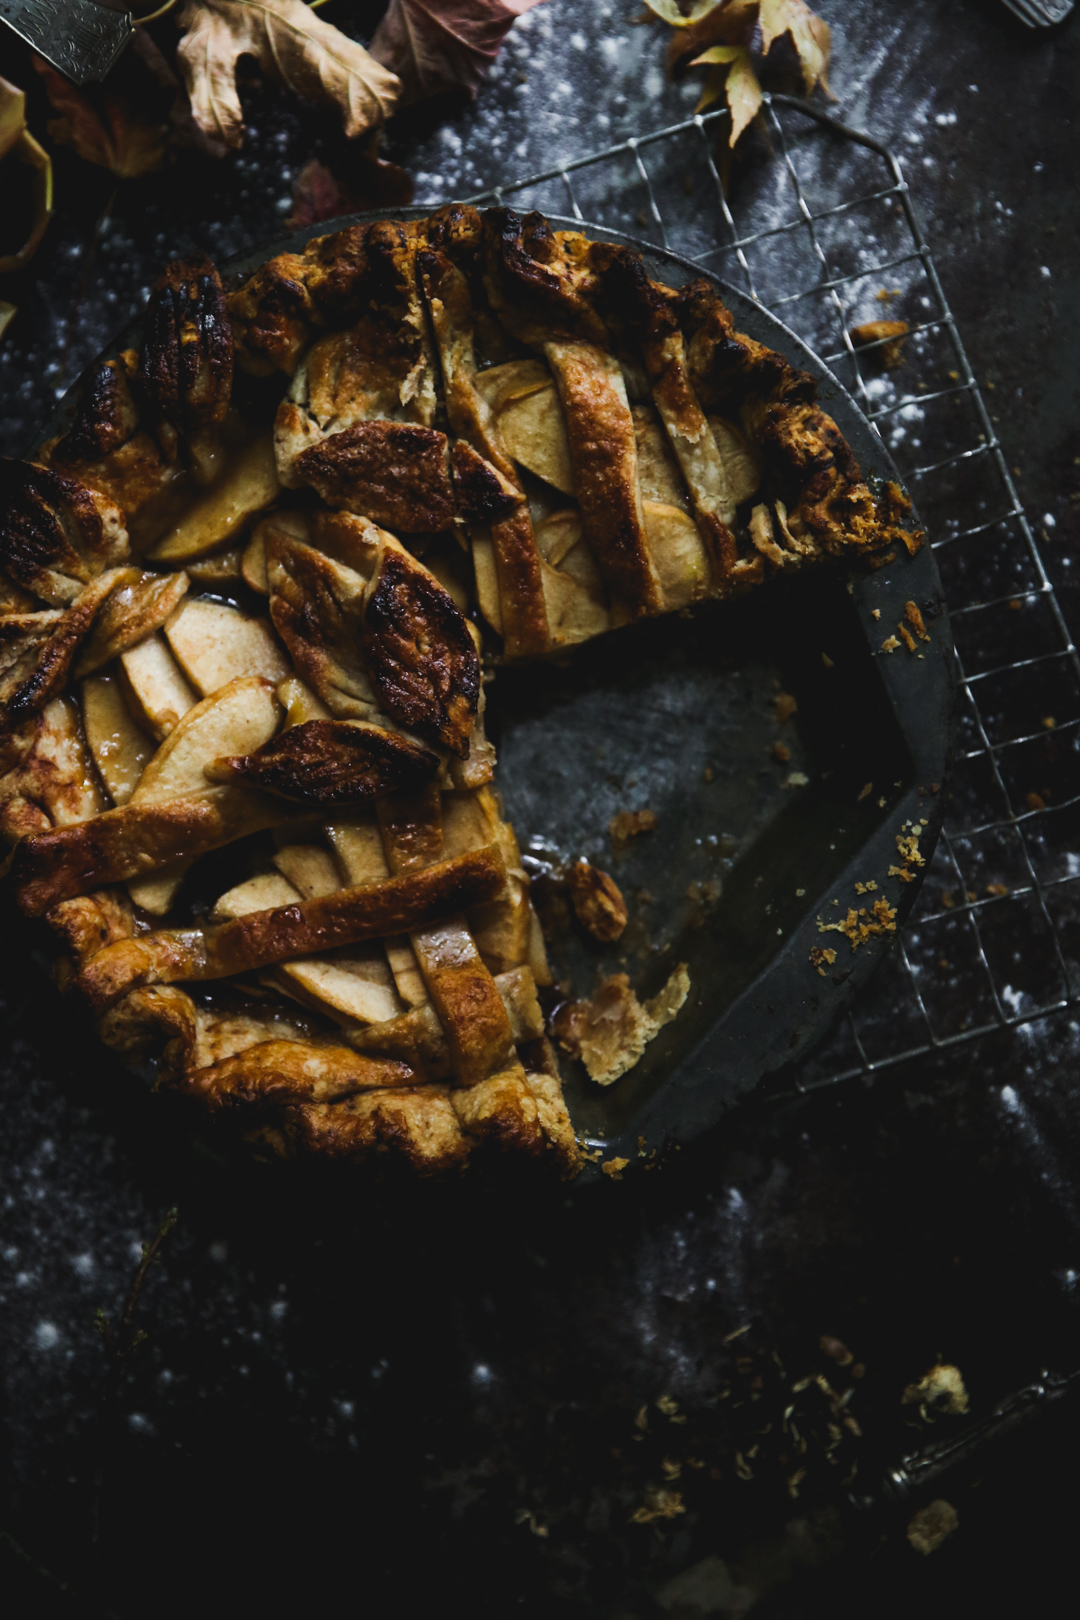 apple-bourbon-pie-photography-recipe-and-styling-by-christiann-koepke-of-christiannkoepke-com-14